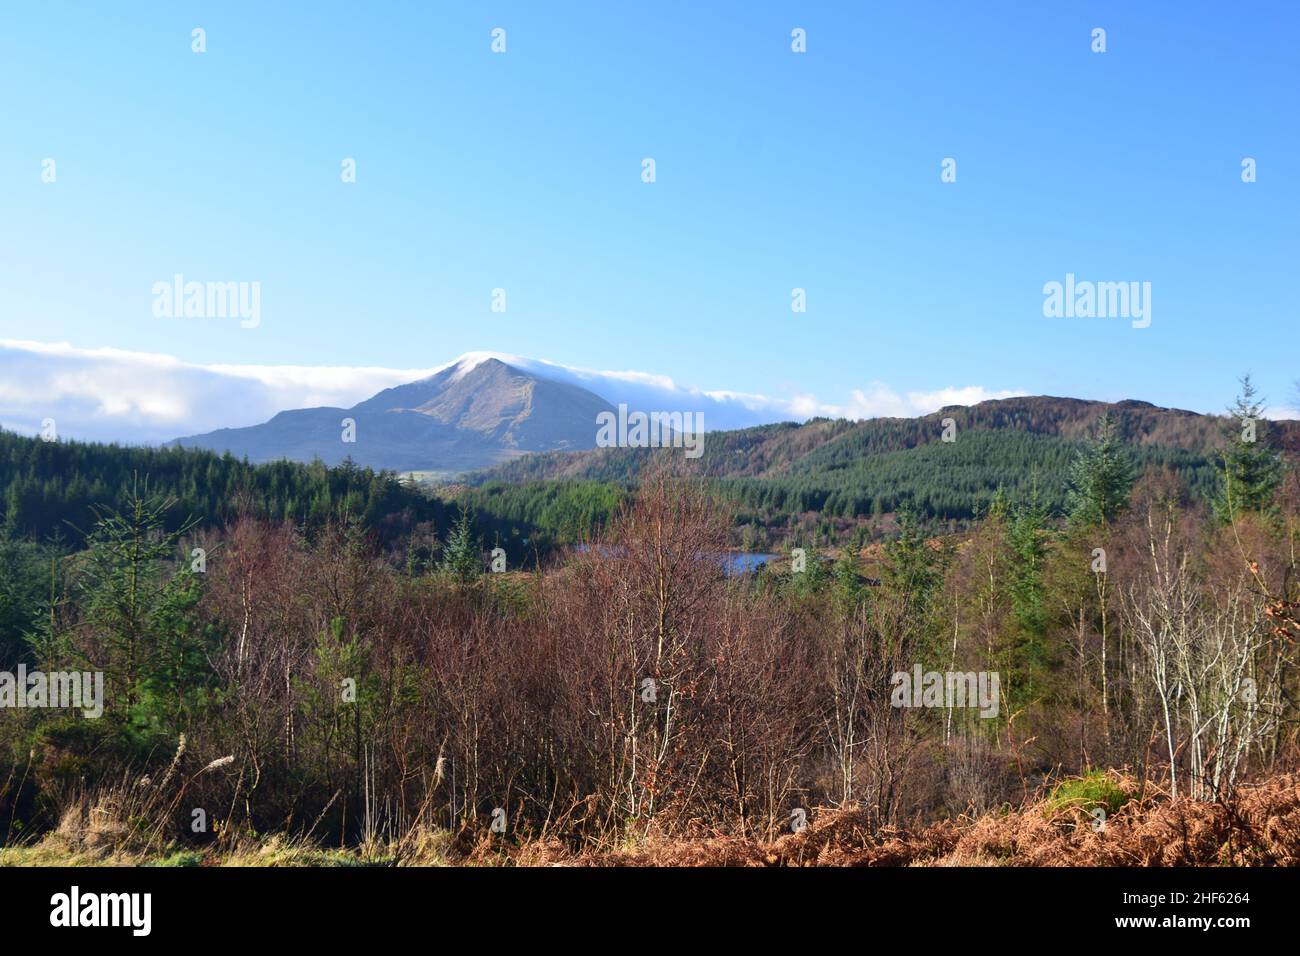 Mountains, Clouds, Forests, Blue skies and beautiful scenery on a trail walk in Gwydyr forest Snowdonia national park Wales on a January morning. Stock Photo